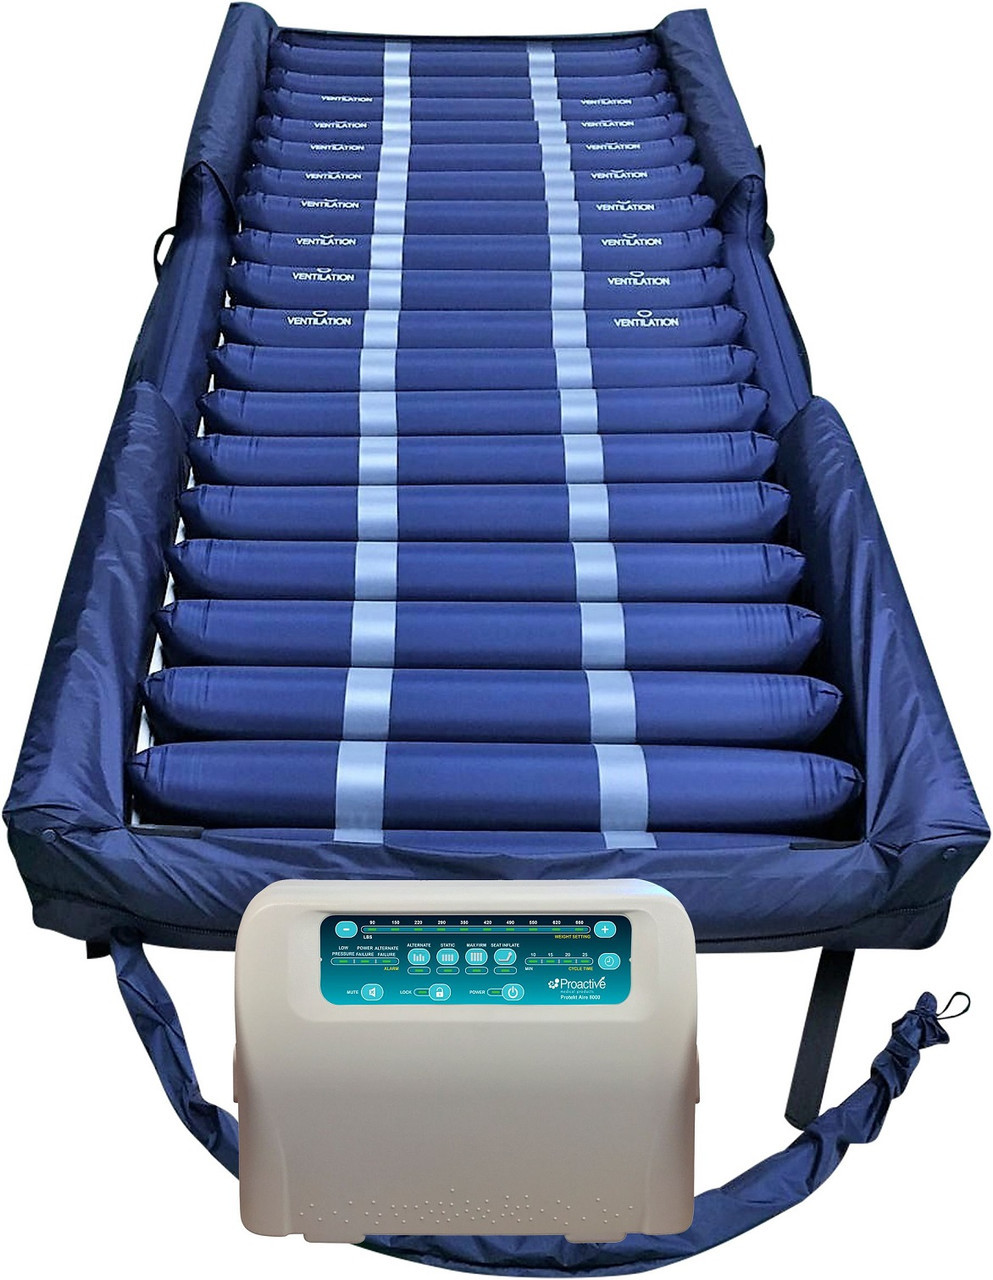 Pikken Pelgrim Neuken Bariatric Alternating Pressure Mattress System with Side Air Bolsters  Protekt Aire 8600AB by Proactive